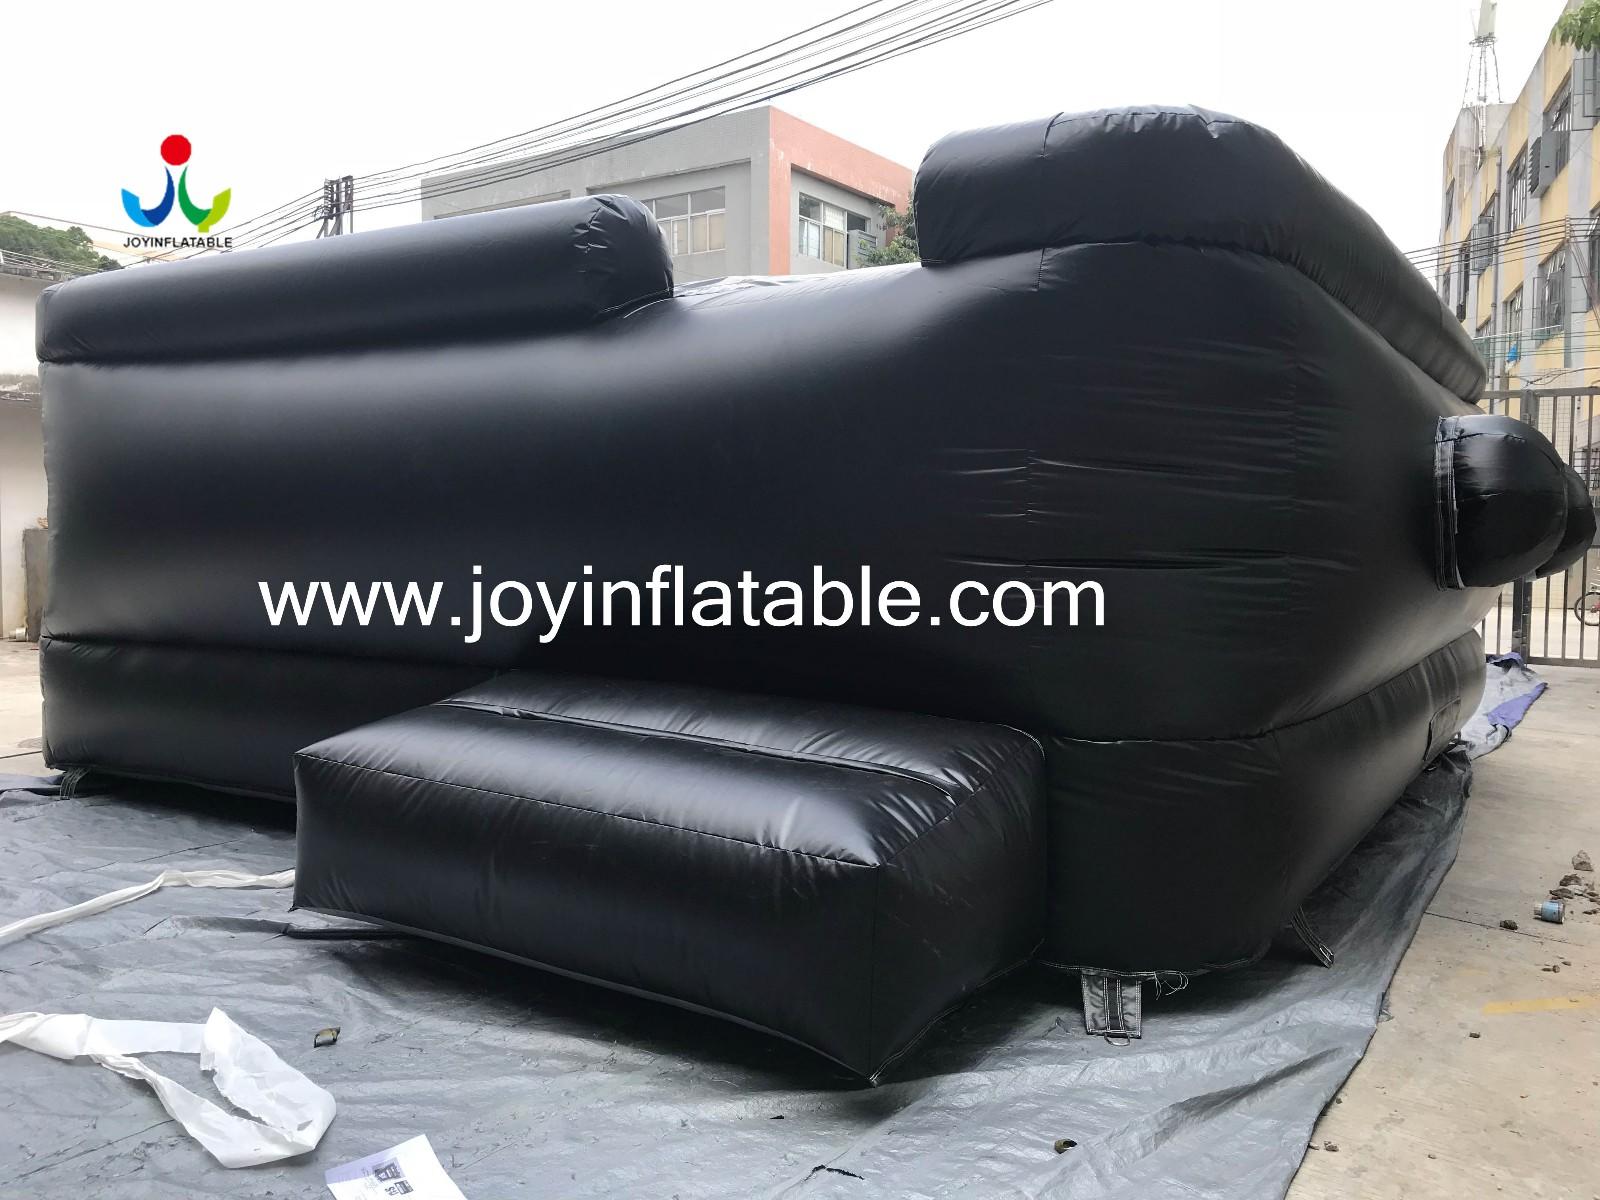 JOY inflatable board inflatable jump pad from China for outdoor